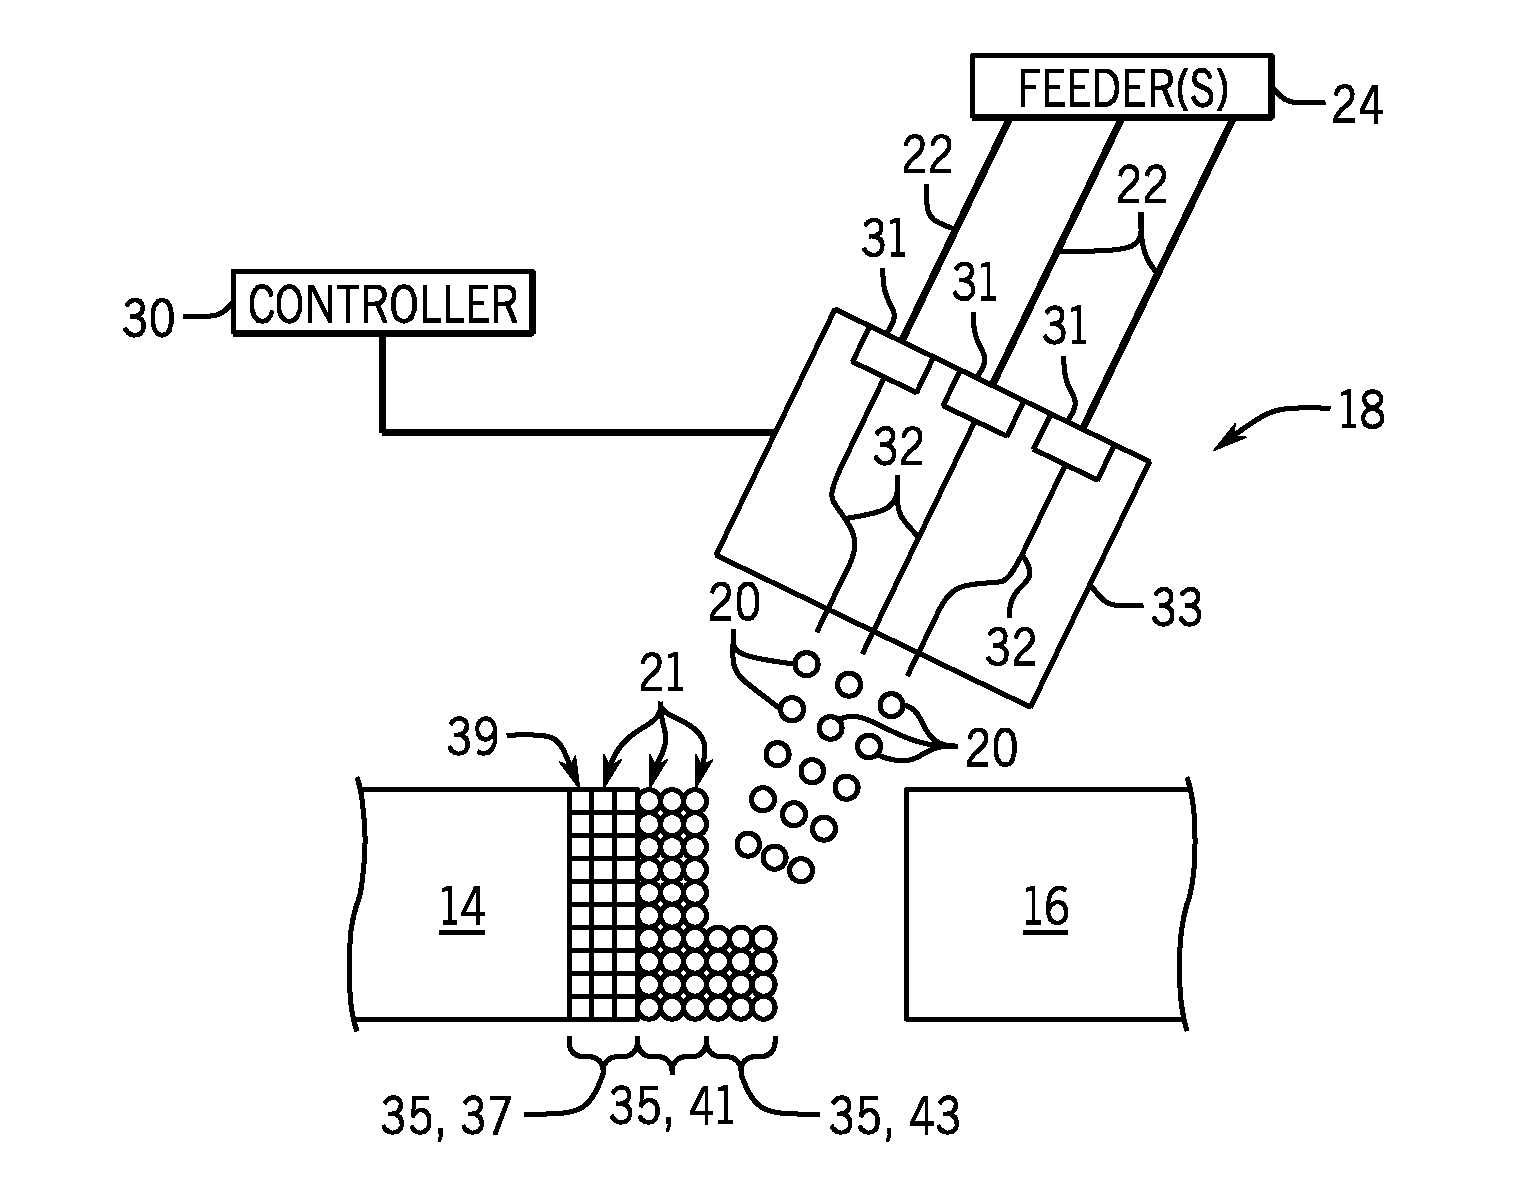 Additive manufacturing system for joining and surface overlay